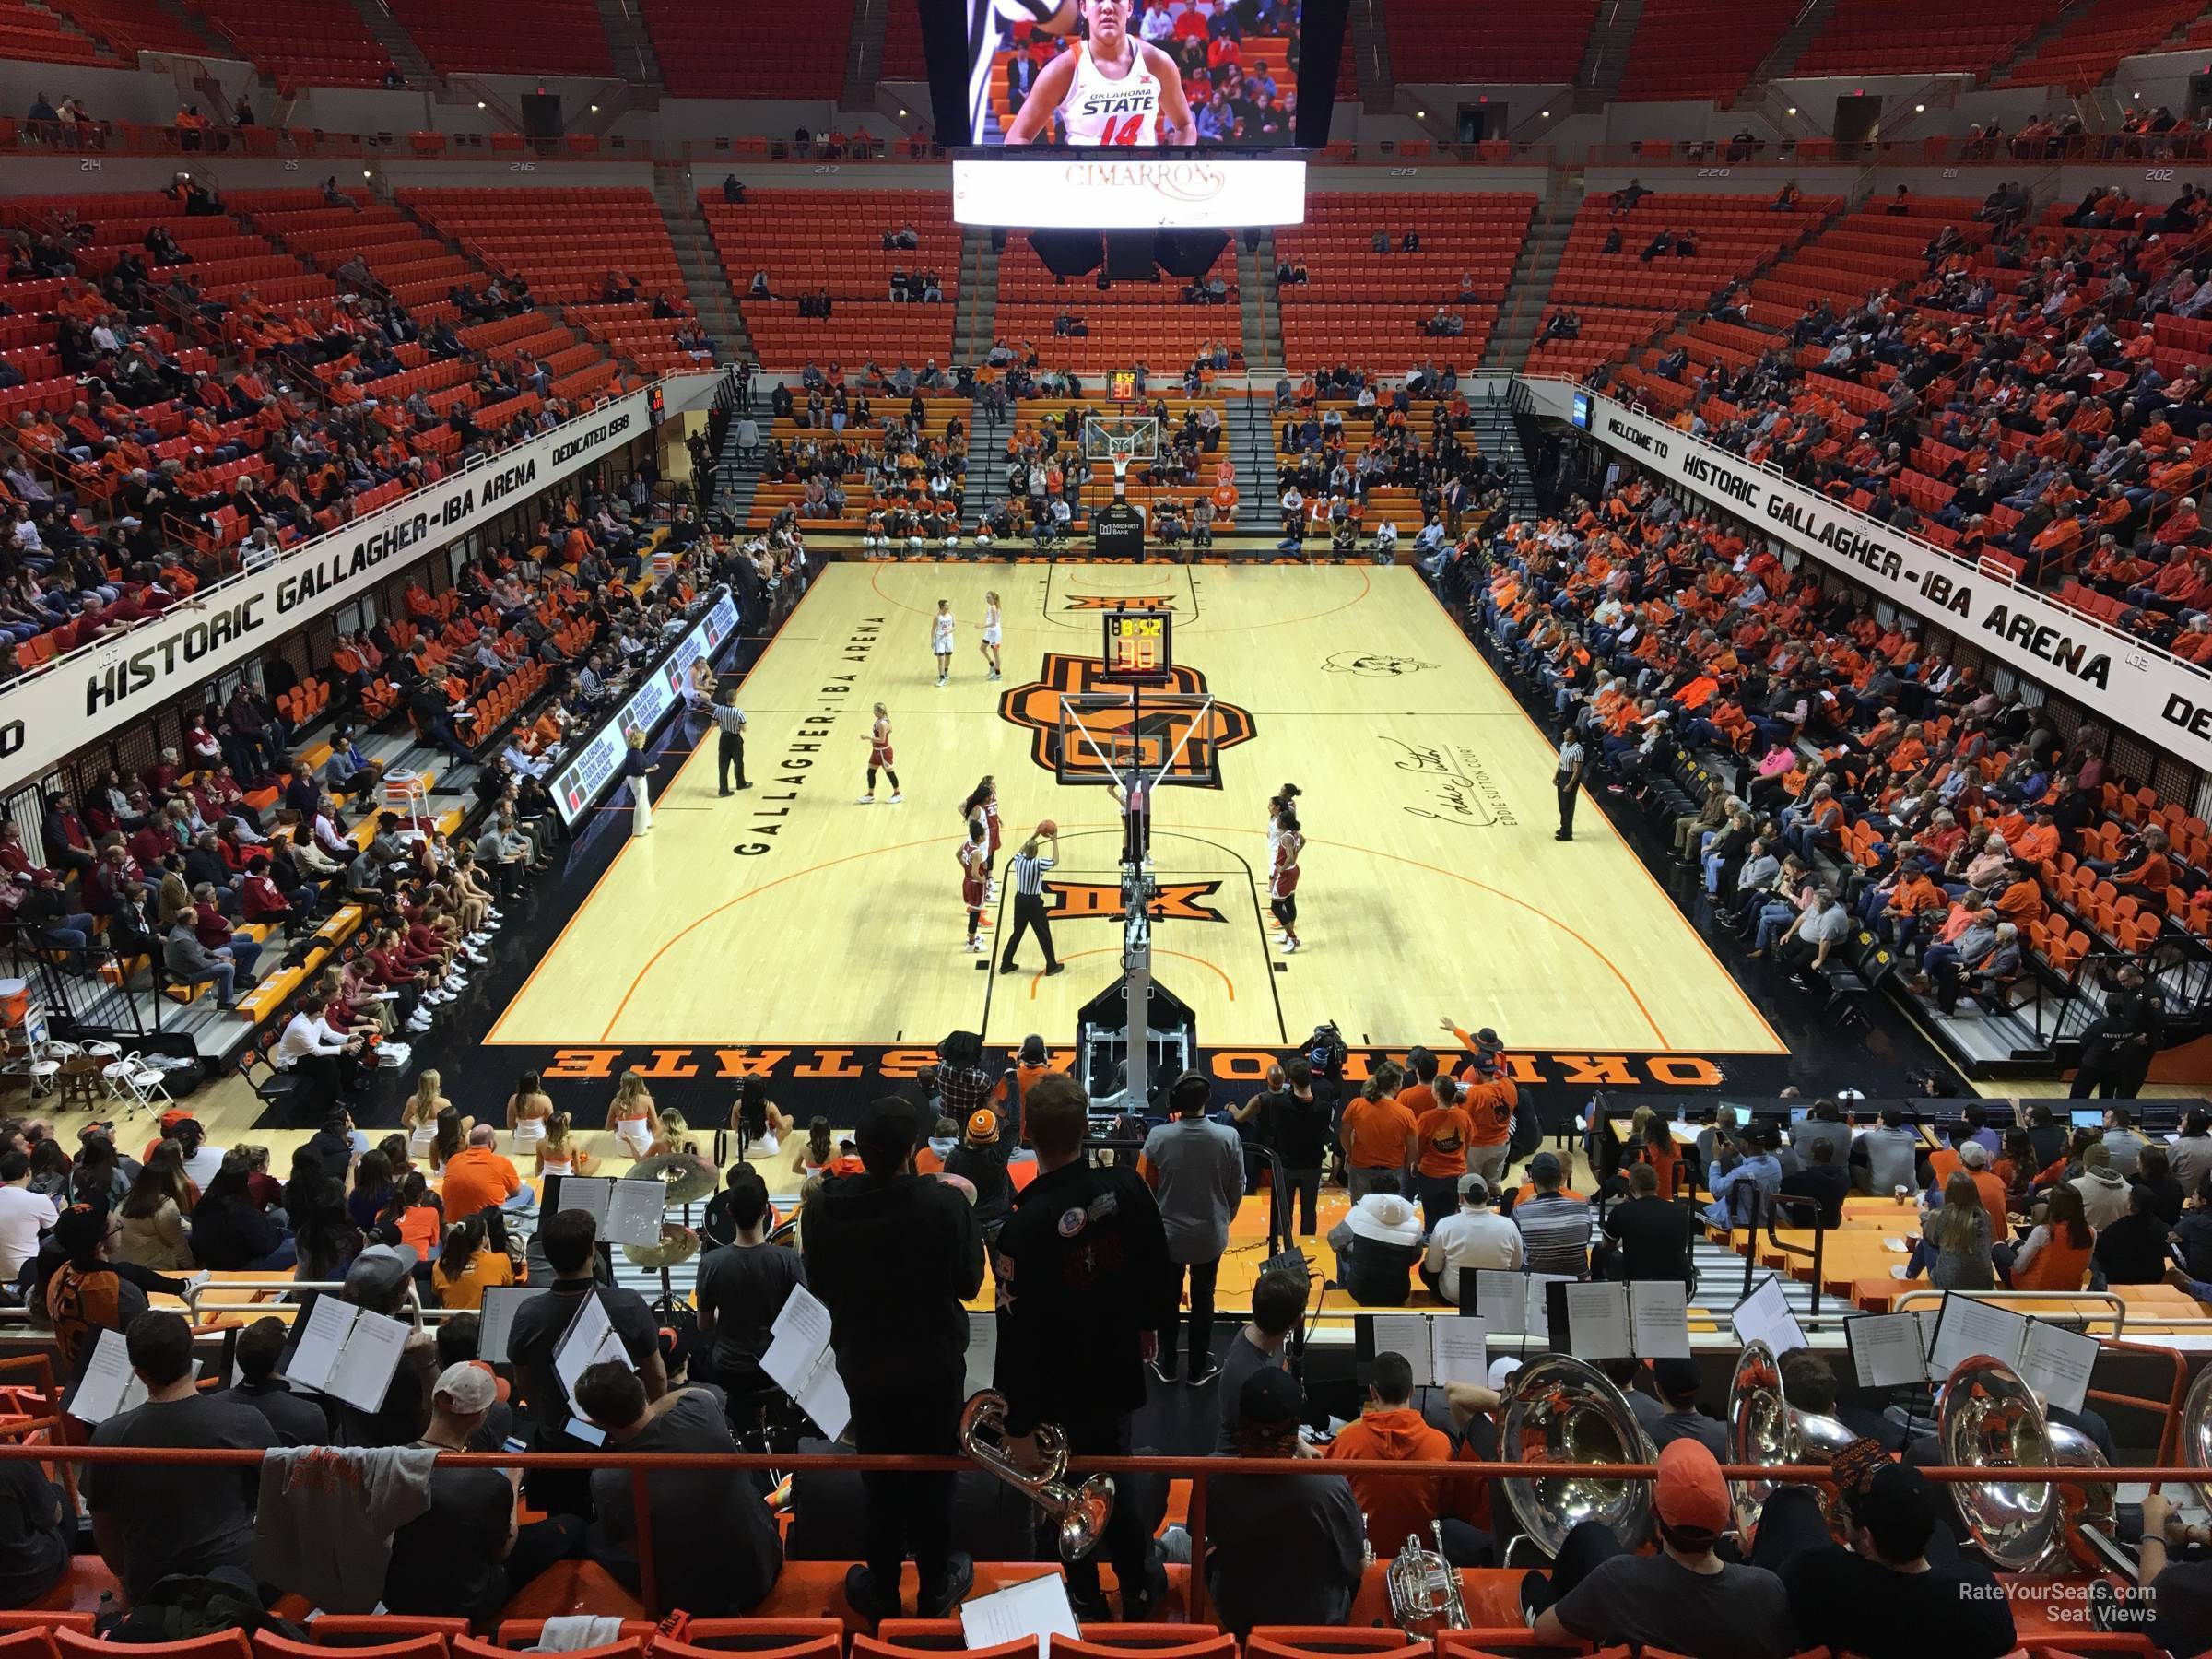 section 208, row 13 seat view  - gallagher-iba arena